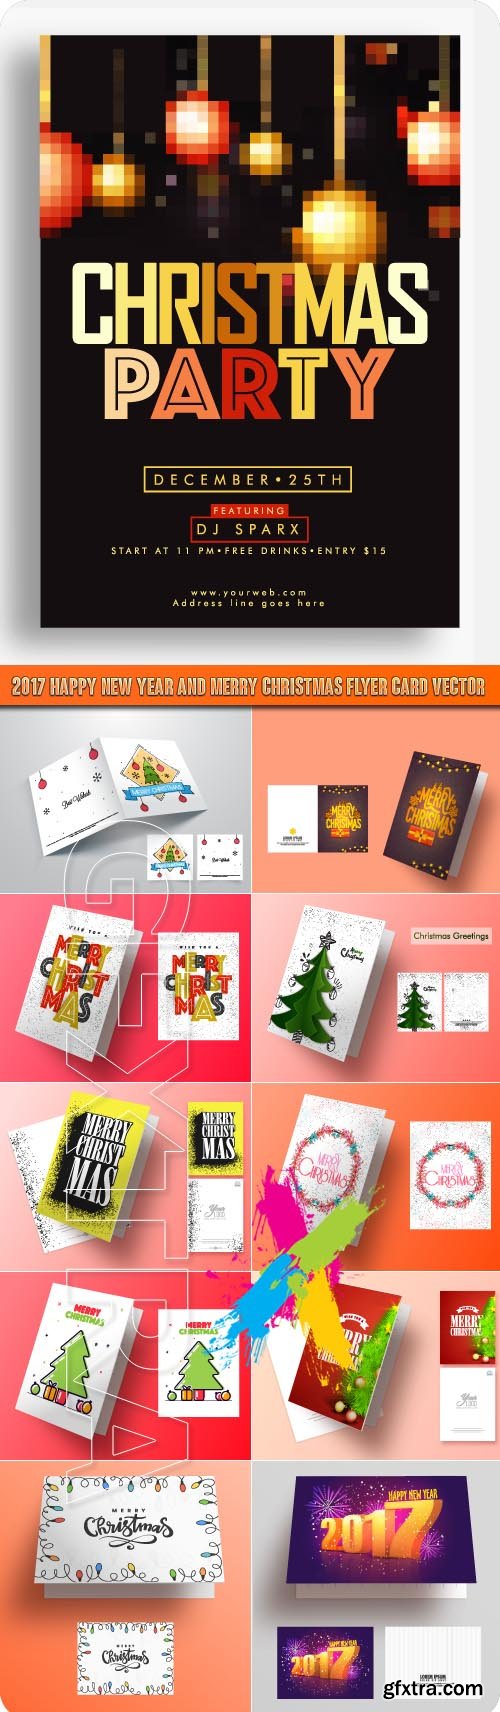 2017 Happy New Year and Merry Christmas flyer card vector